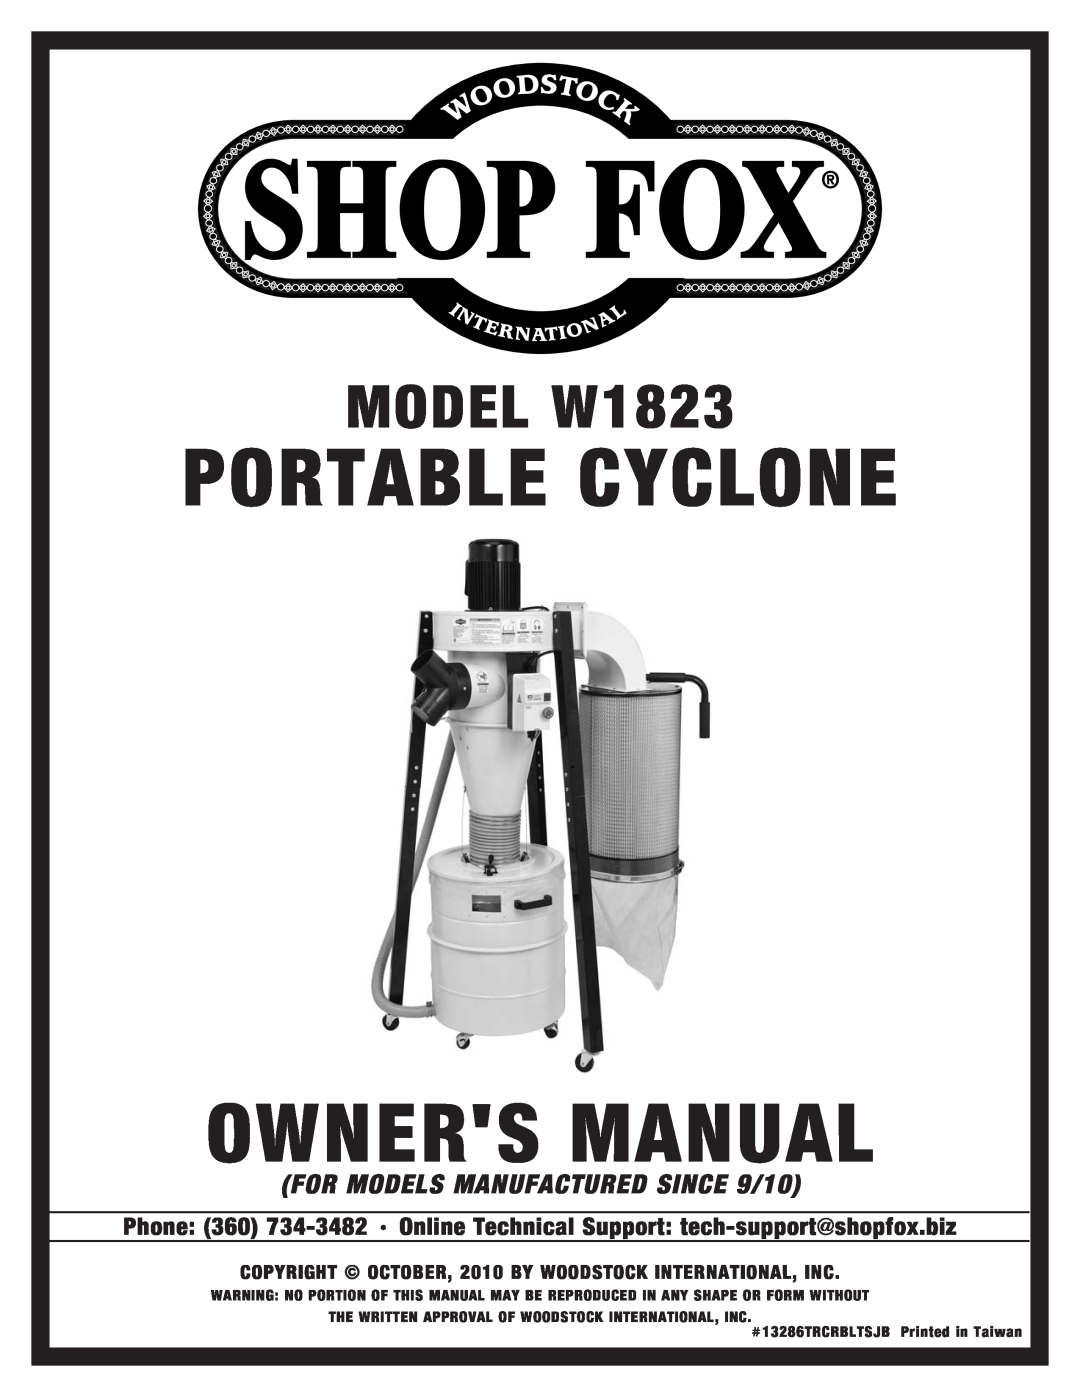 Woodstock manual Owners Manual, Portable Cyclone, MODEL W1823, FOR MODELS MANUFACTURED SINCE 9/10 